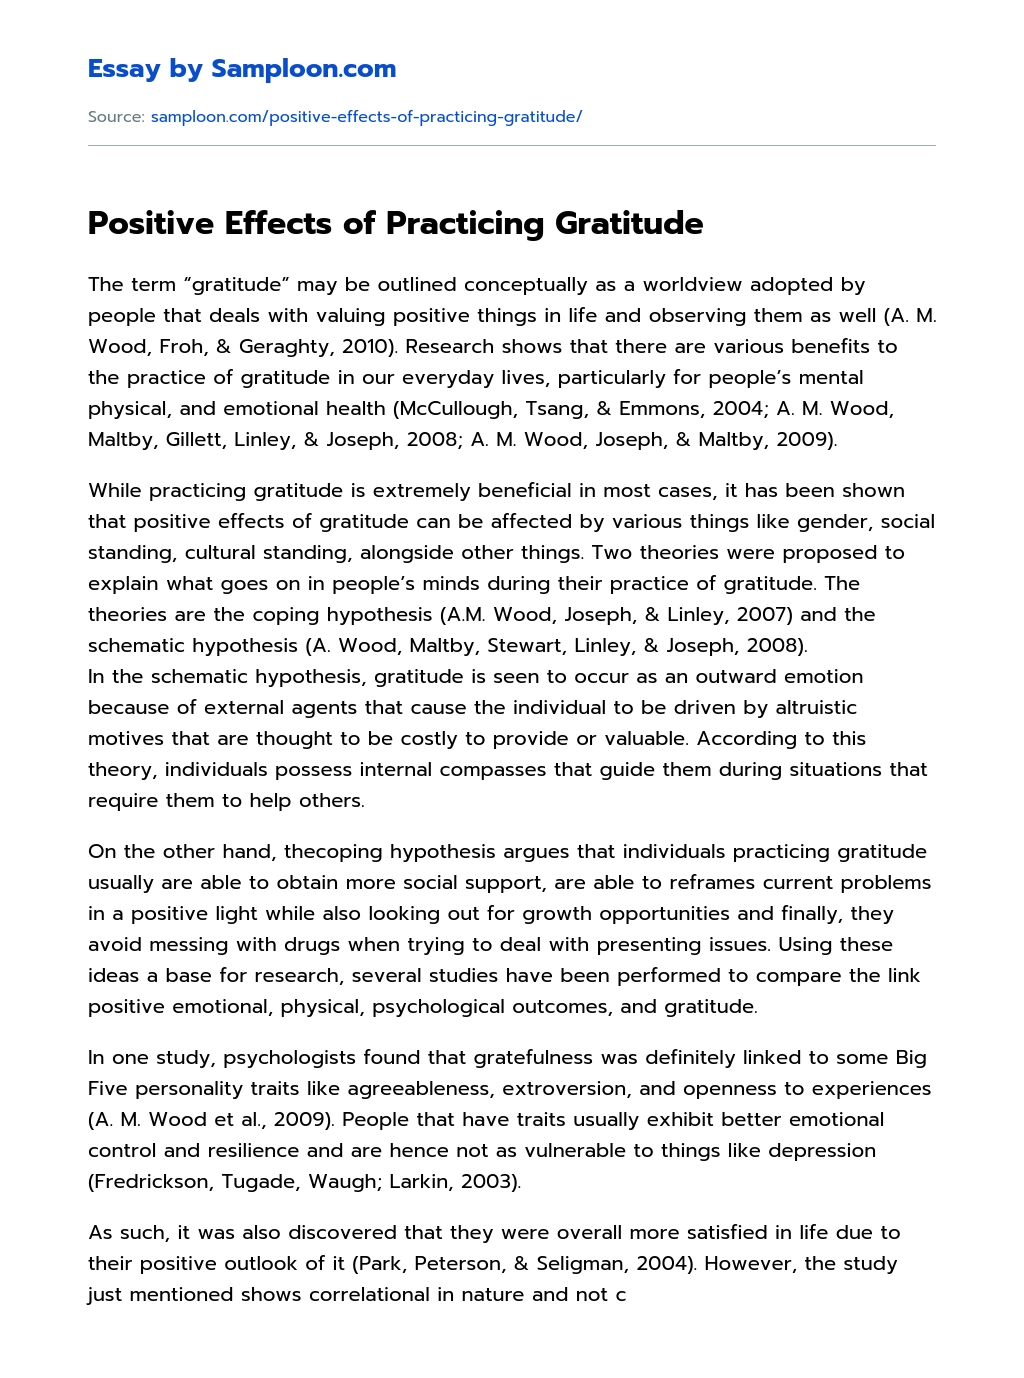 Positive Effects of Practicing Gratitude essay